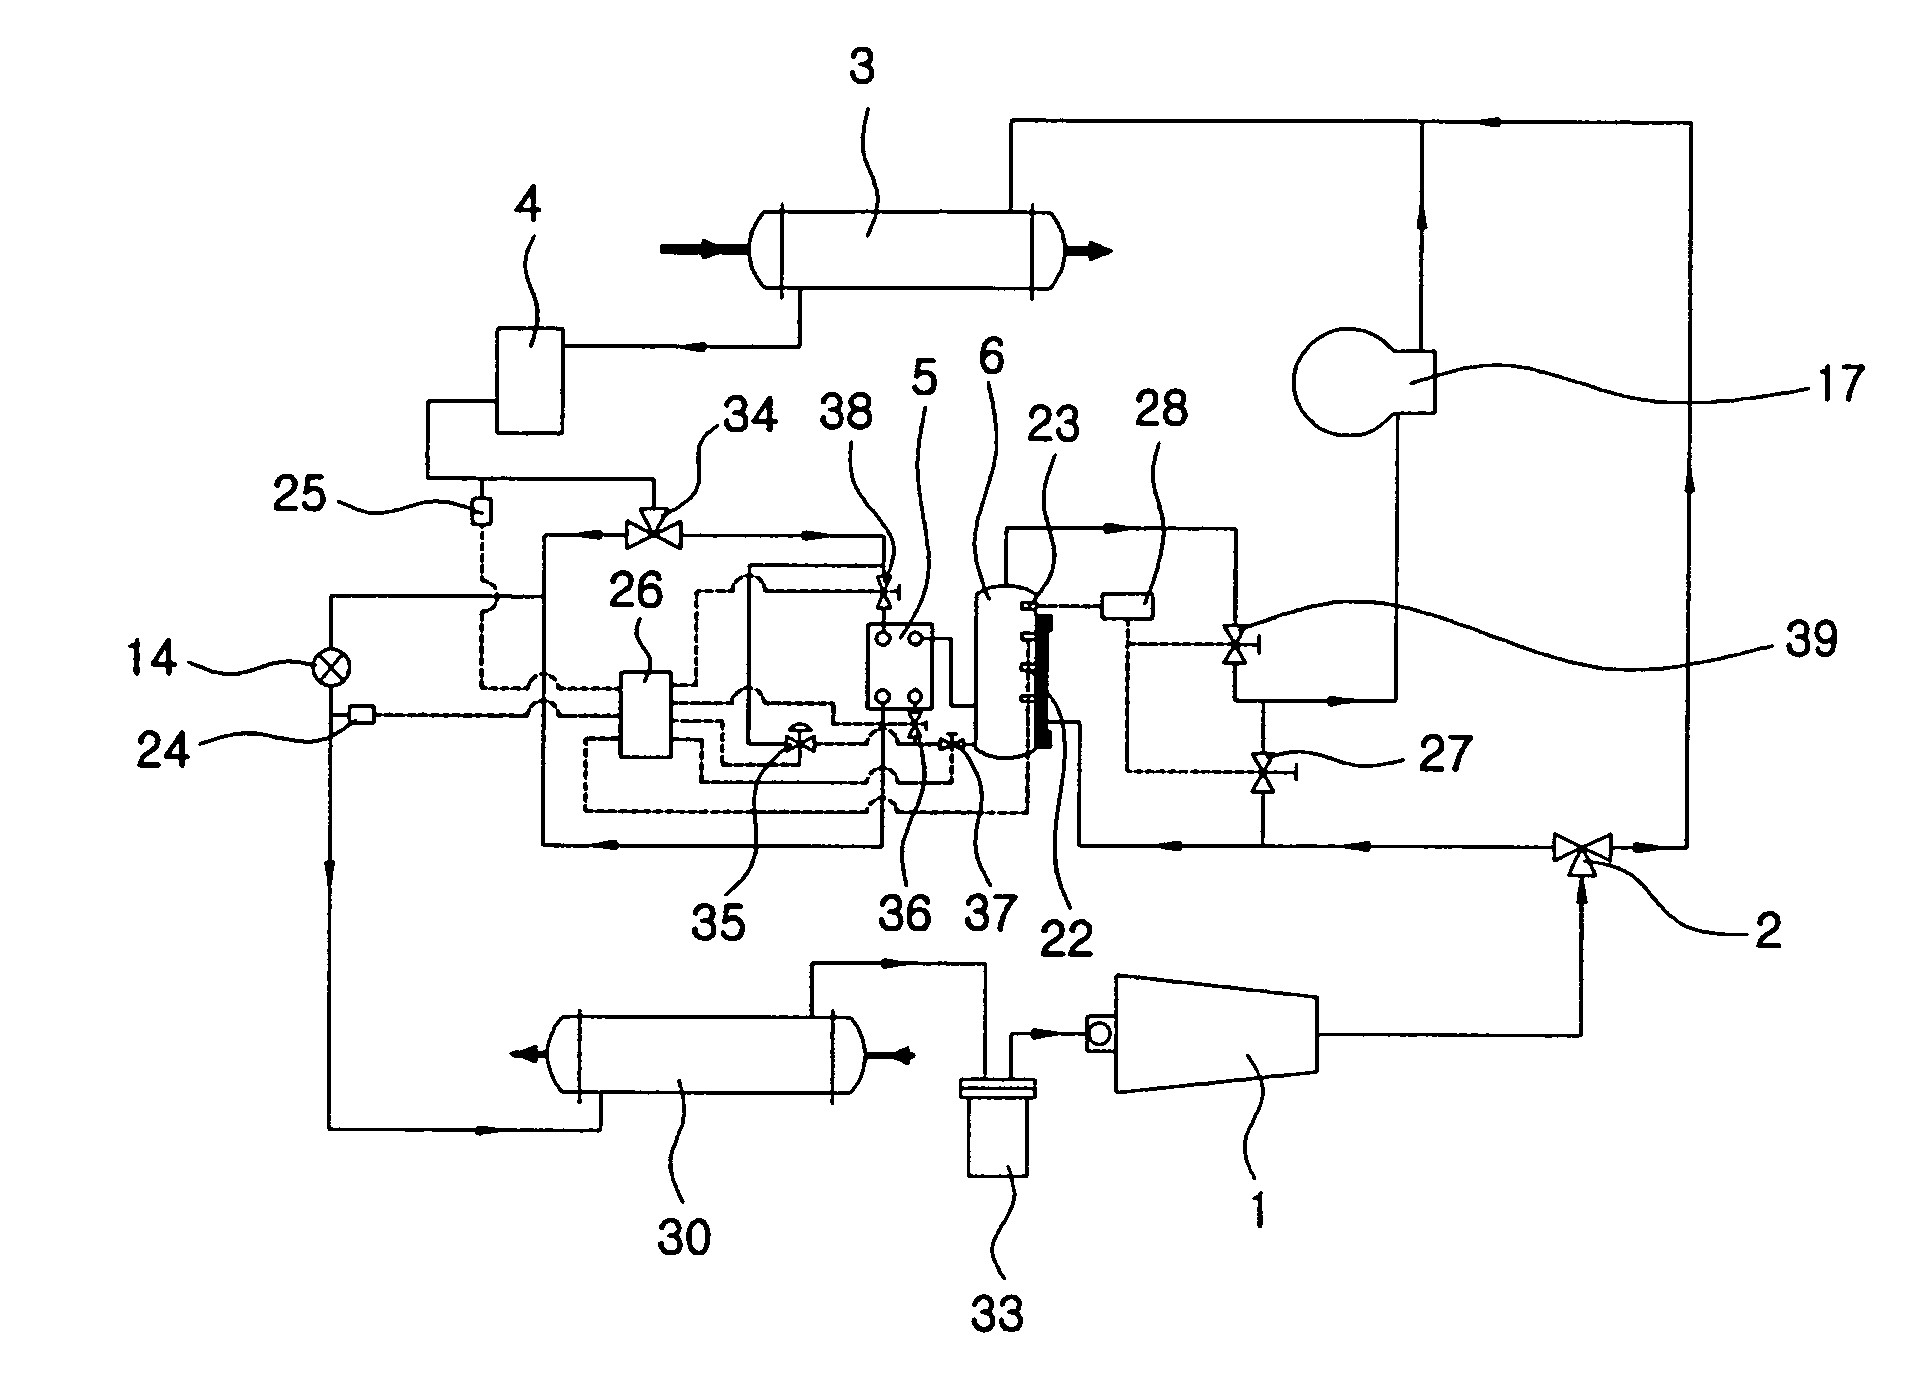 Flash tank of two-stage compression heat pump system for heating and cooling